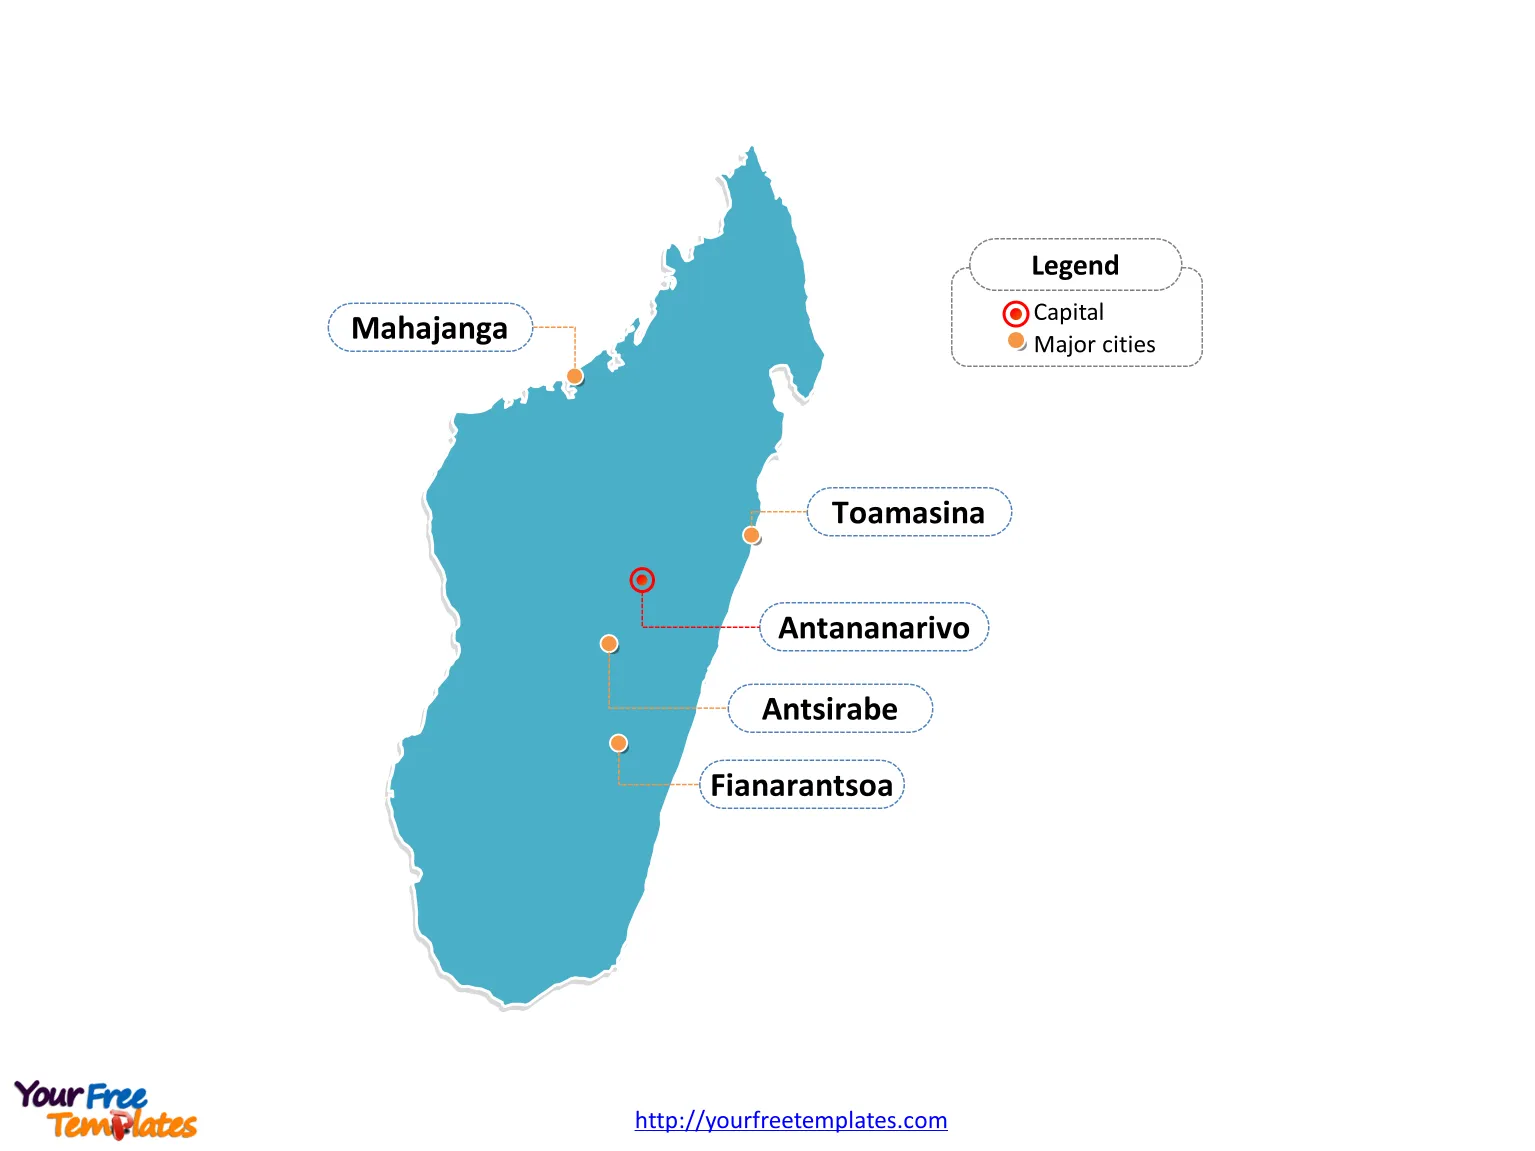 Madagascar Outline map labeled with cities